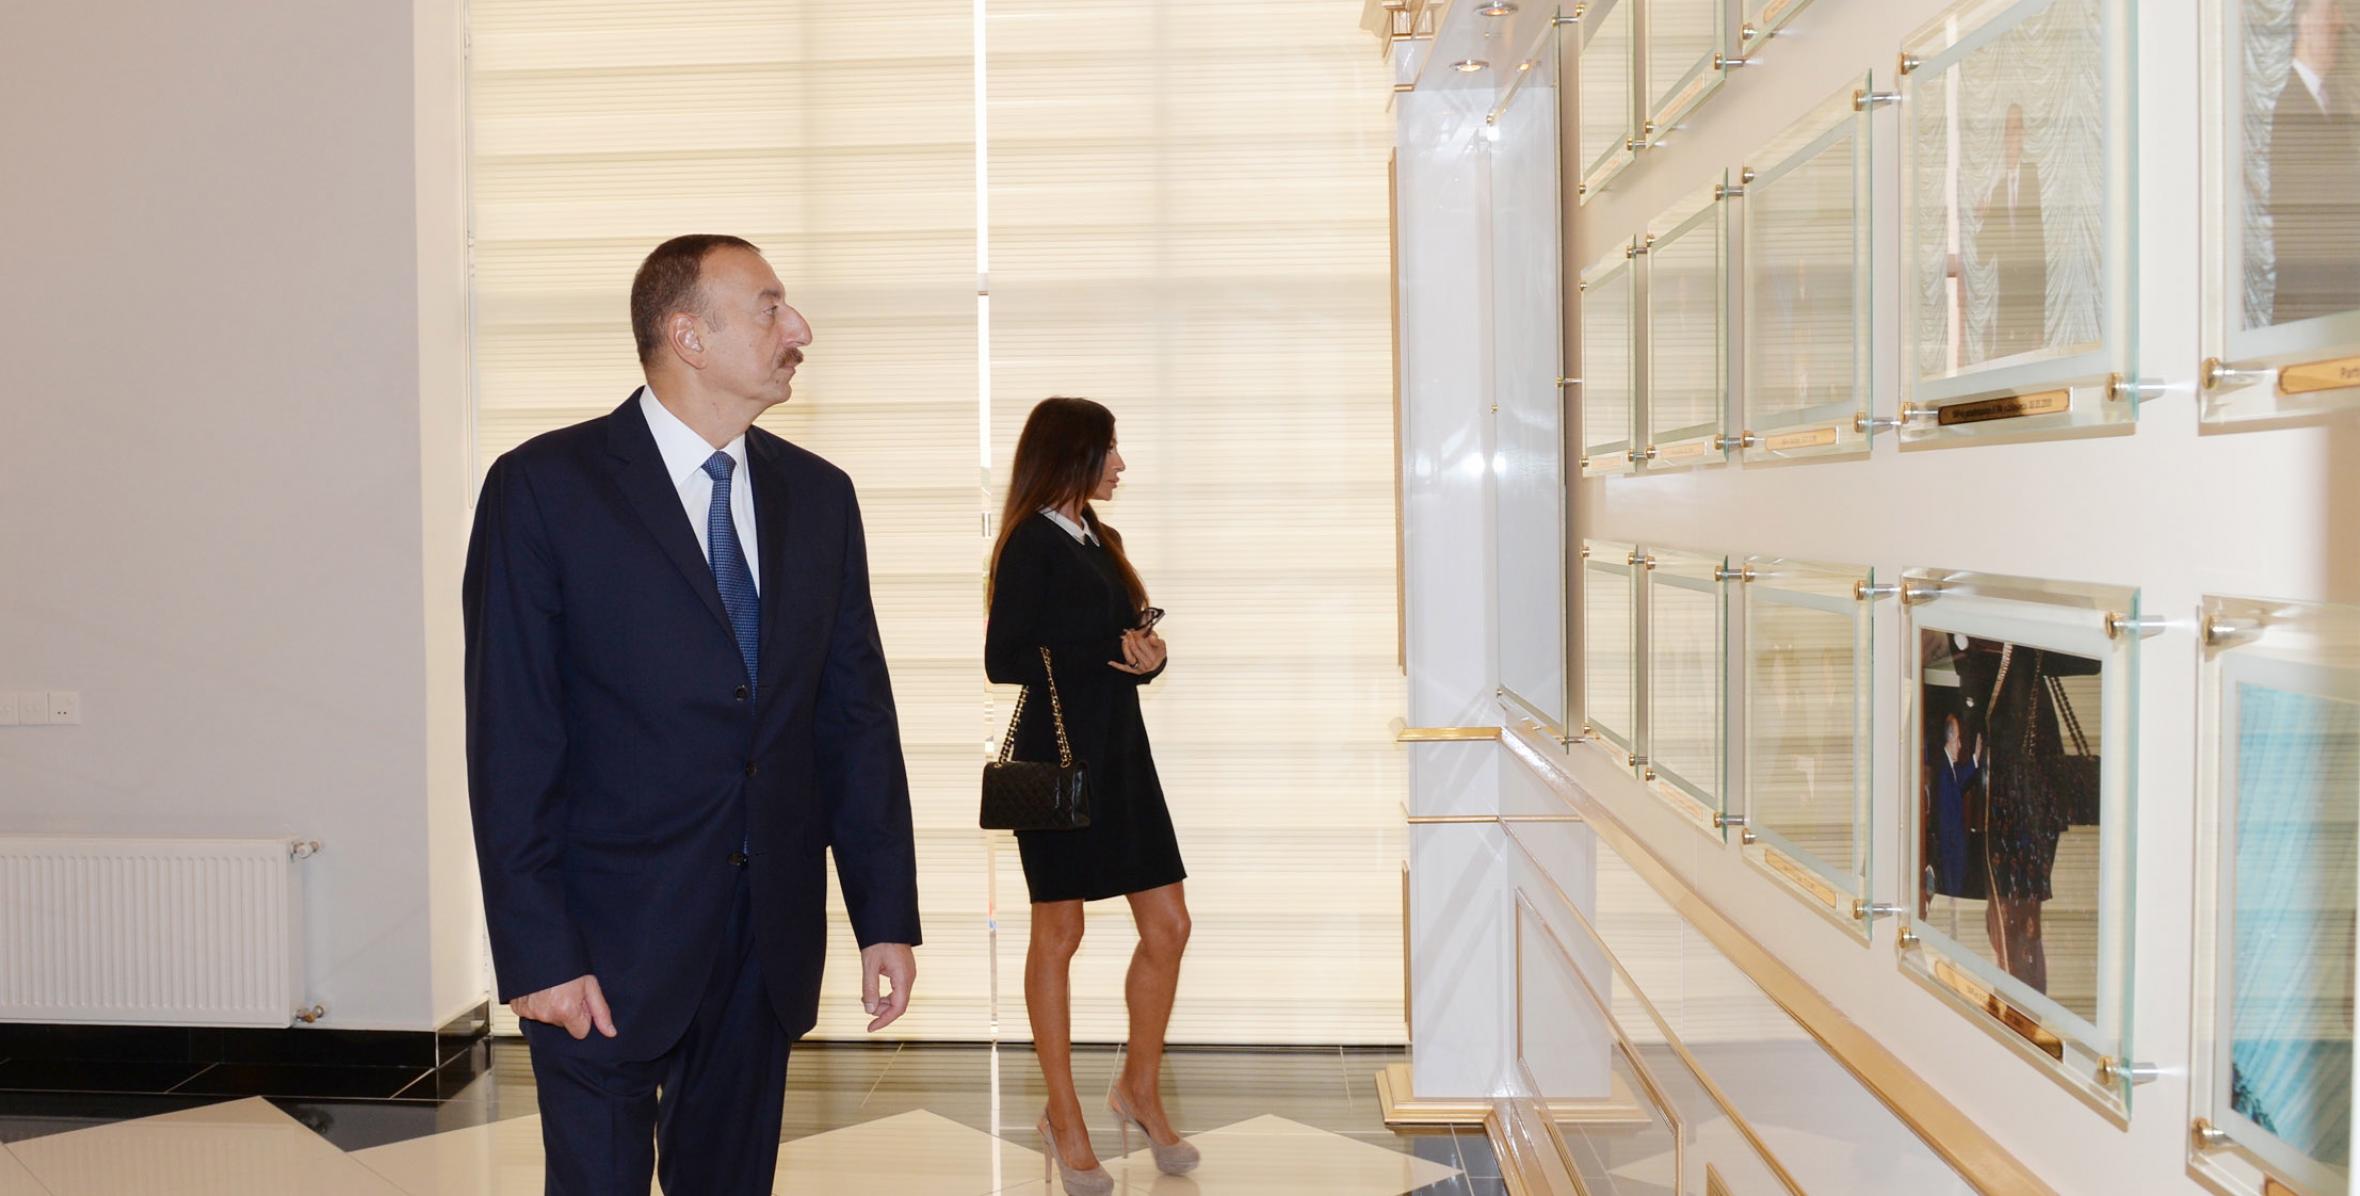 Ilham Aliyev attended the opening of a new office building of the Guba district branch of the "Yeni Azerbaijan Party"